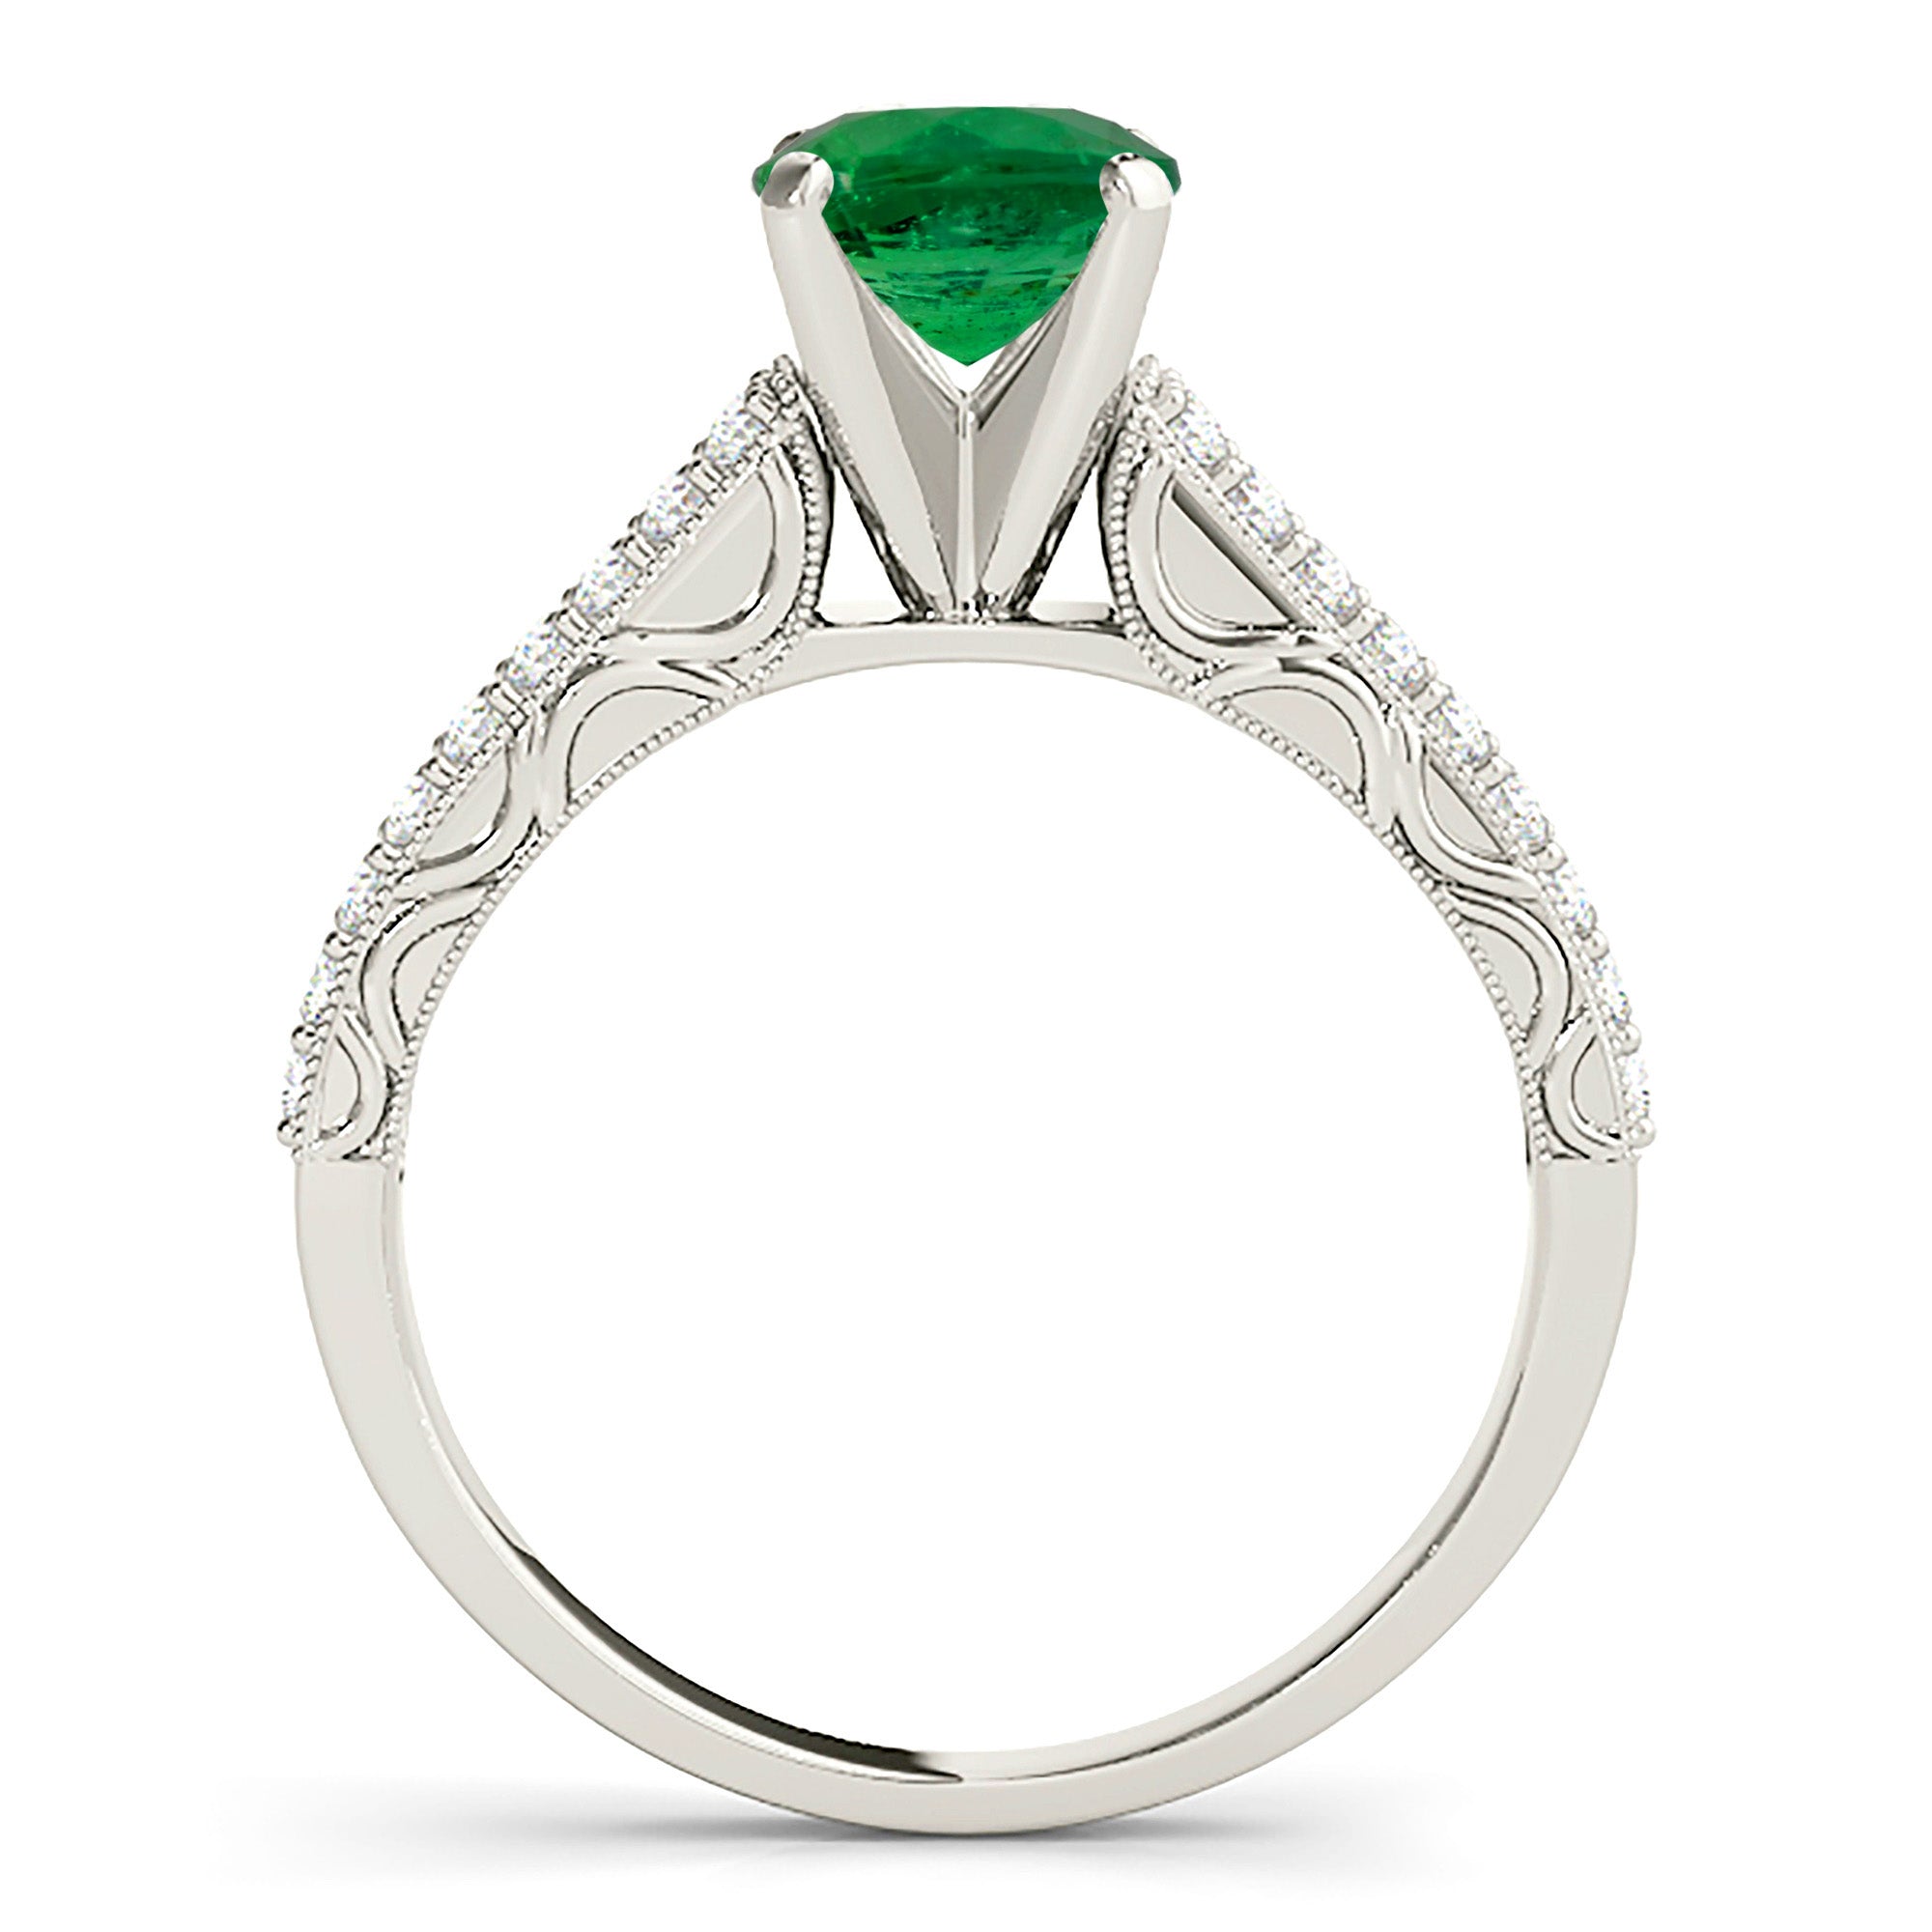 1.14 ct. Genuine Solitaire Emerald Ring With 0.35 ctw. Double Row Diamond Band-in 14K/18K White, Yellow, Rose Gold and Platinum - Christmas Jewelry Gift -VIRABYANI